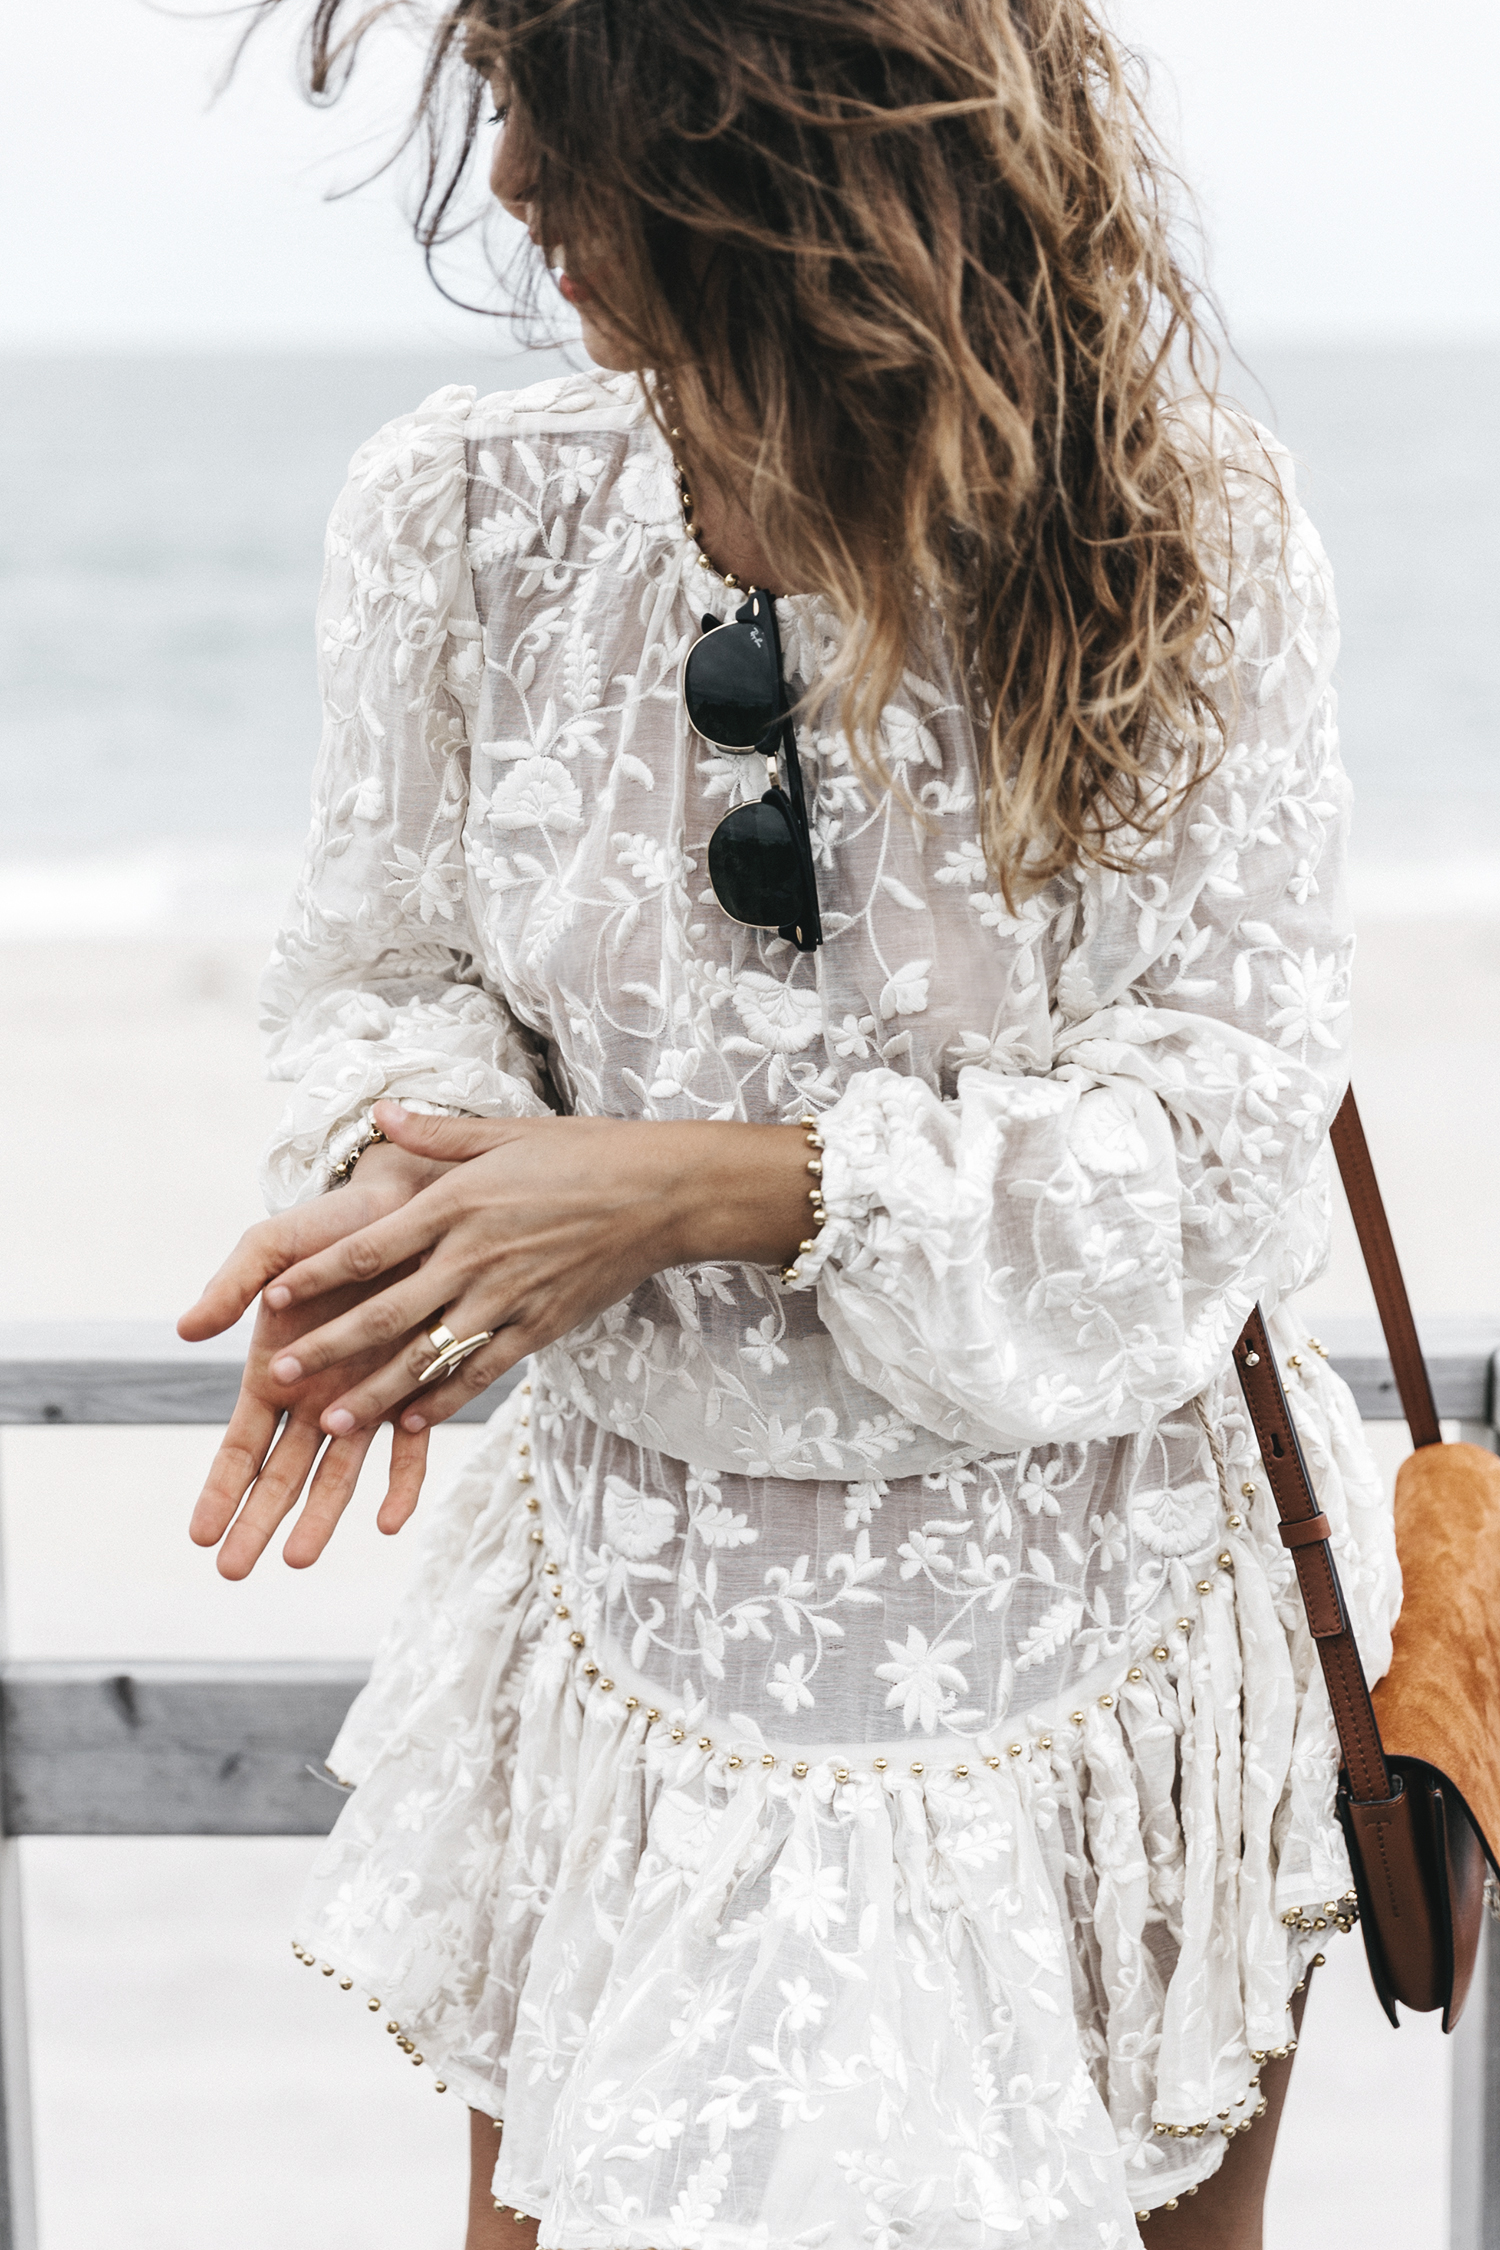 Revolve_in_The_Hamptons-Zimmermann-Embroidered_Dress-WHite_Dress-Chloe_Fay_Bag-Chloe_Wedges-Outfit-177